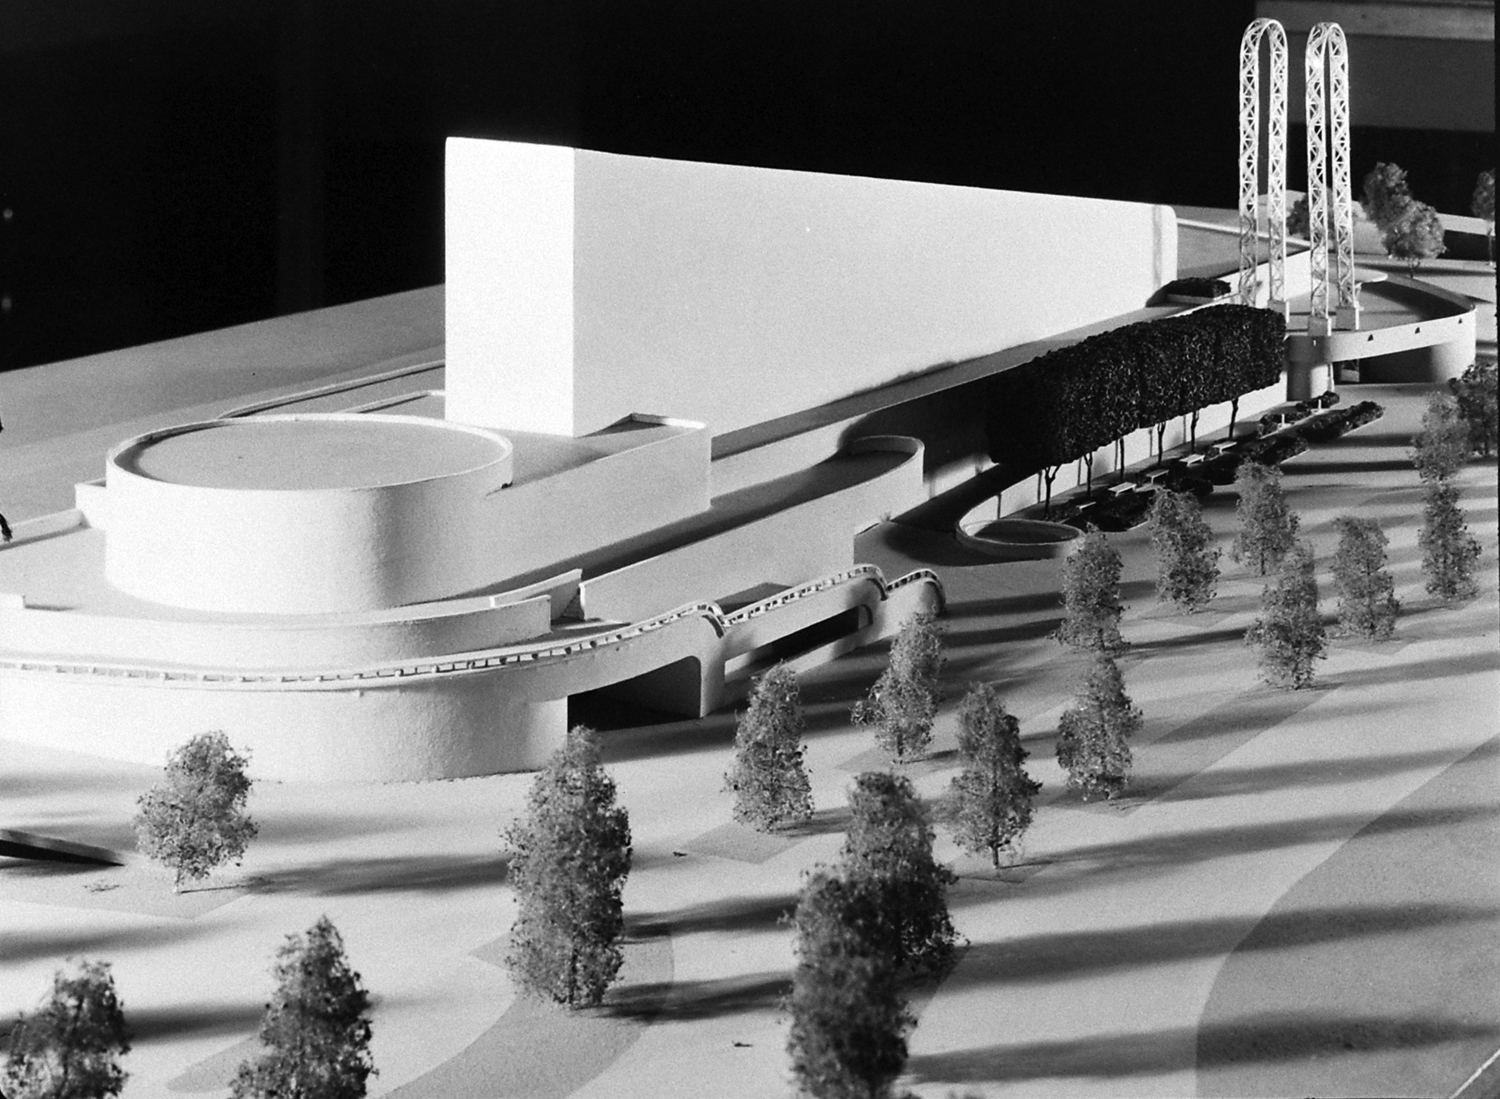 Architectural model for a textile building created for the 1939 New York World's Fair.